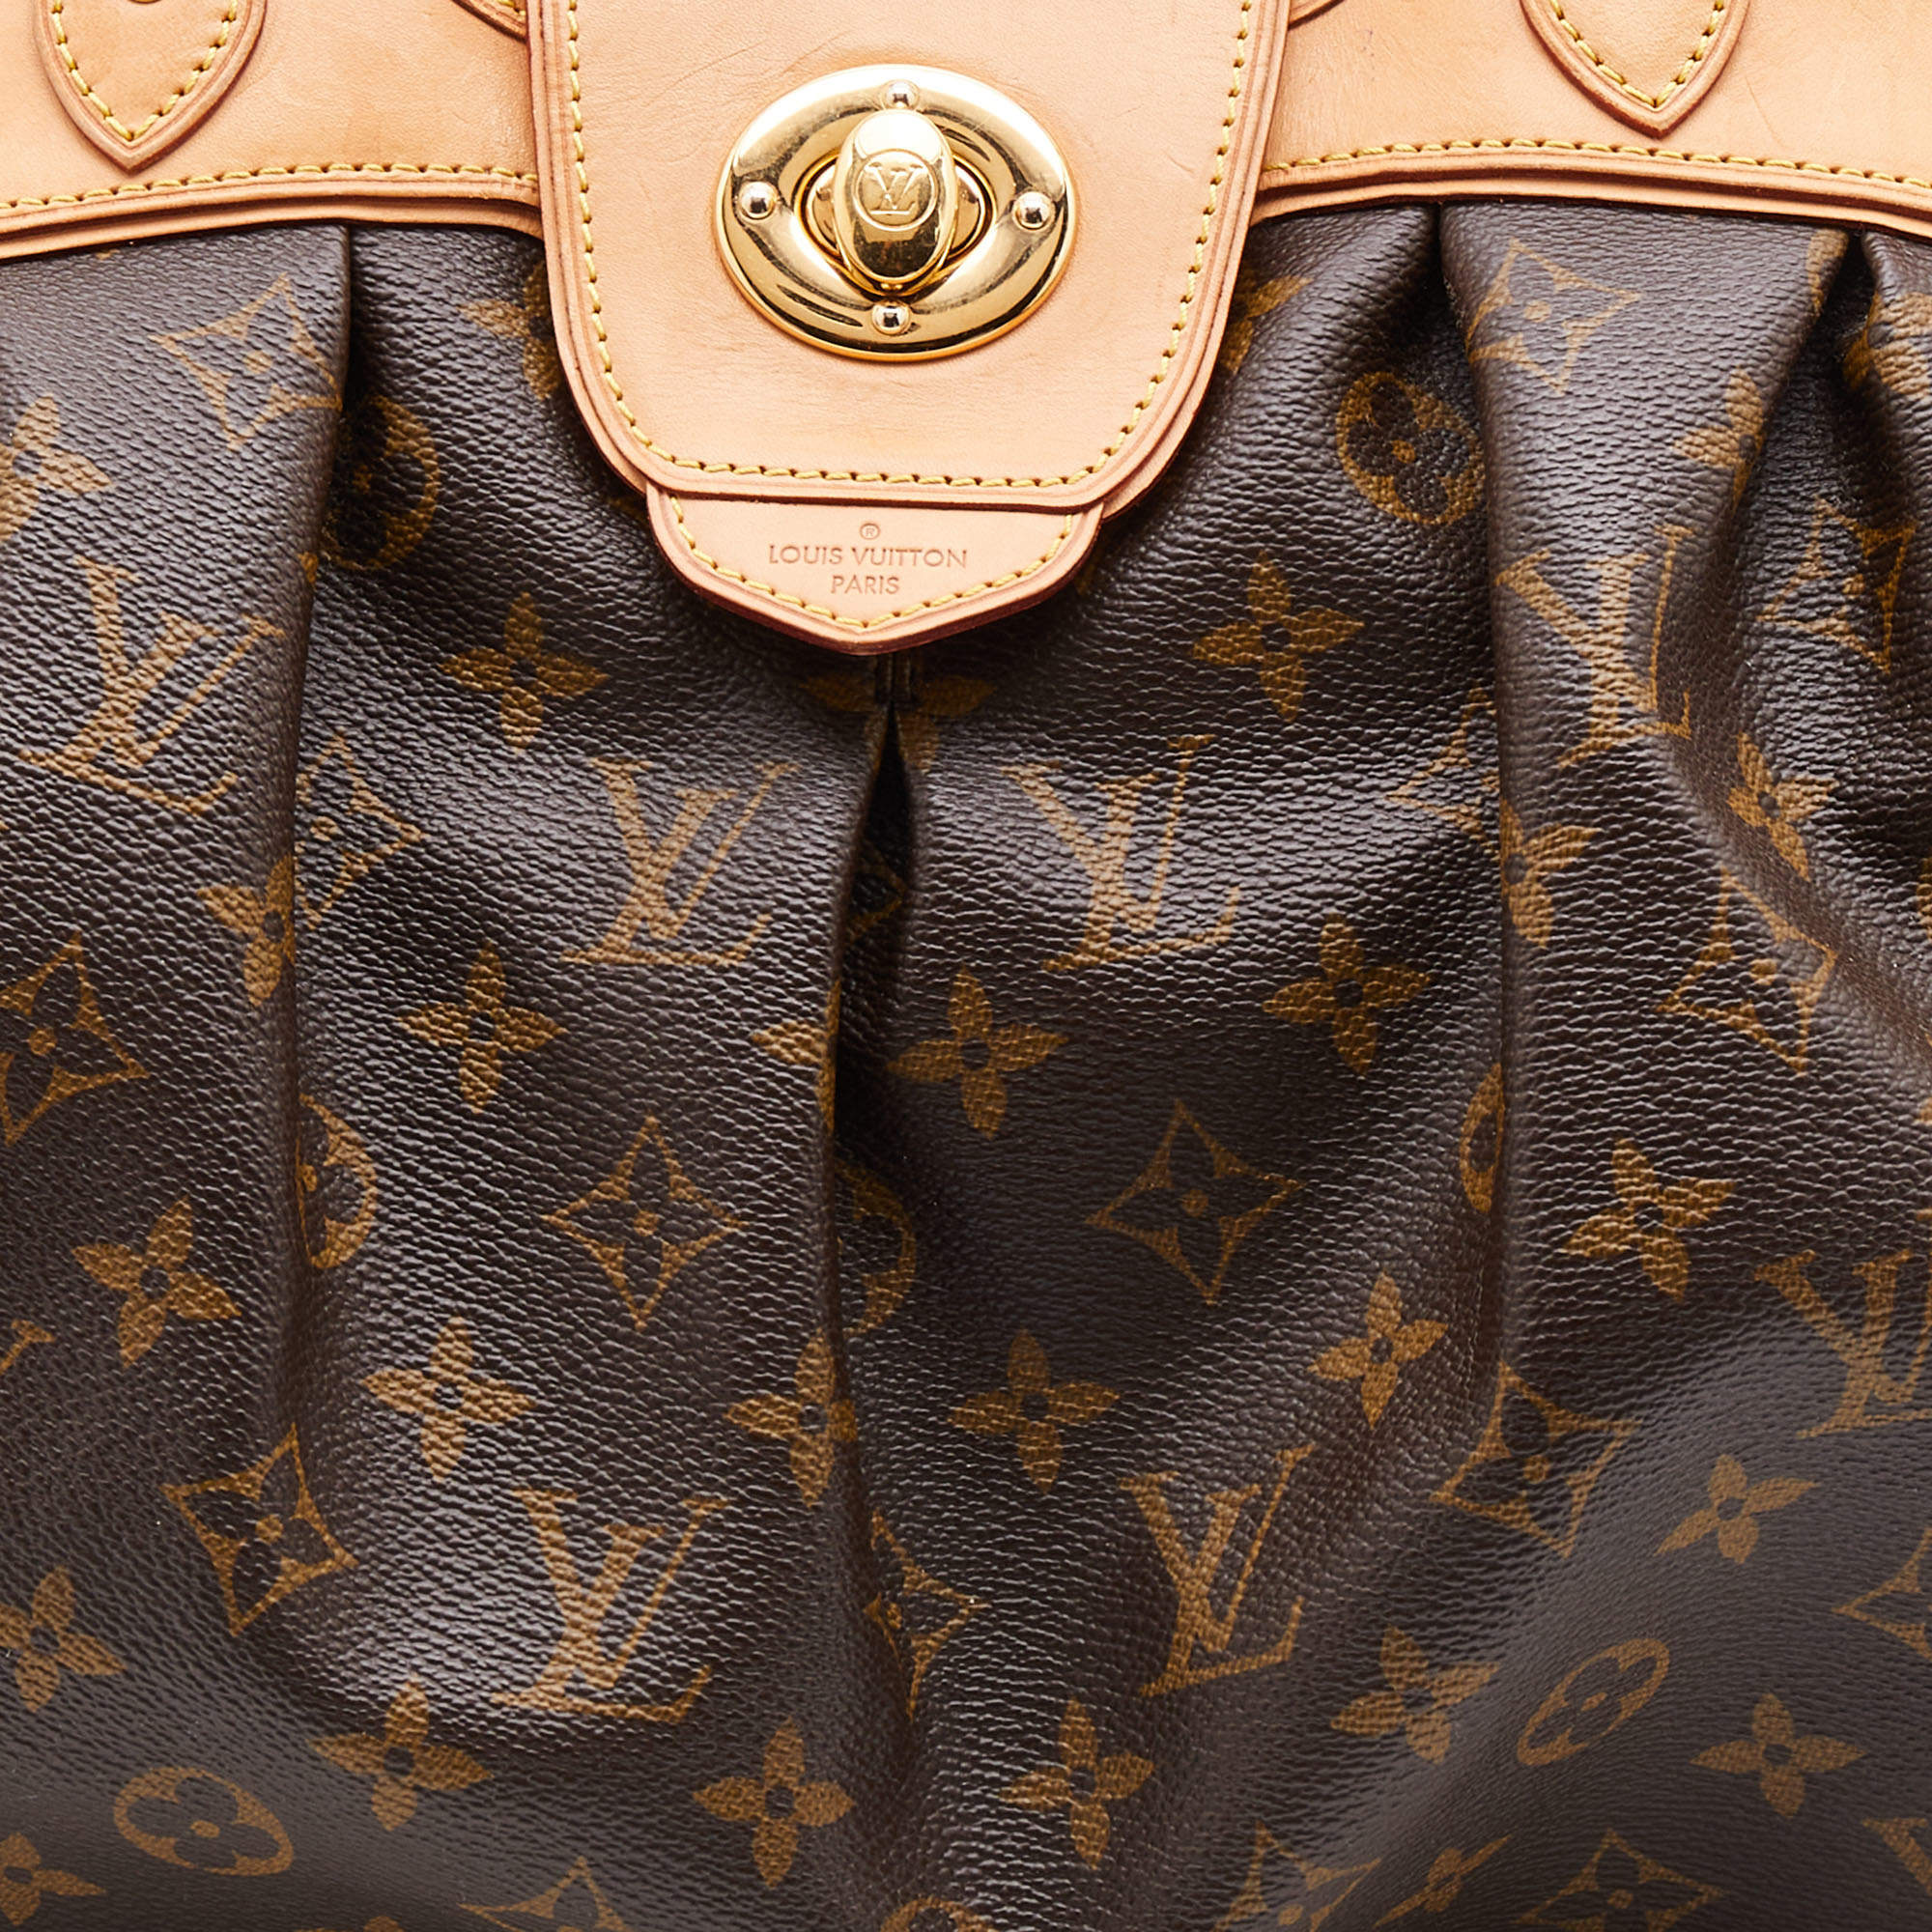 lv boetie outfit